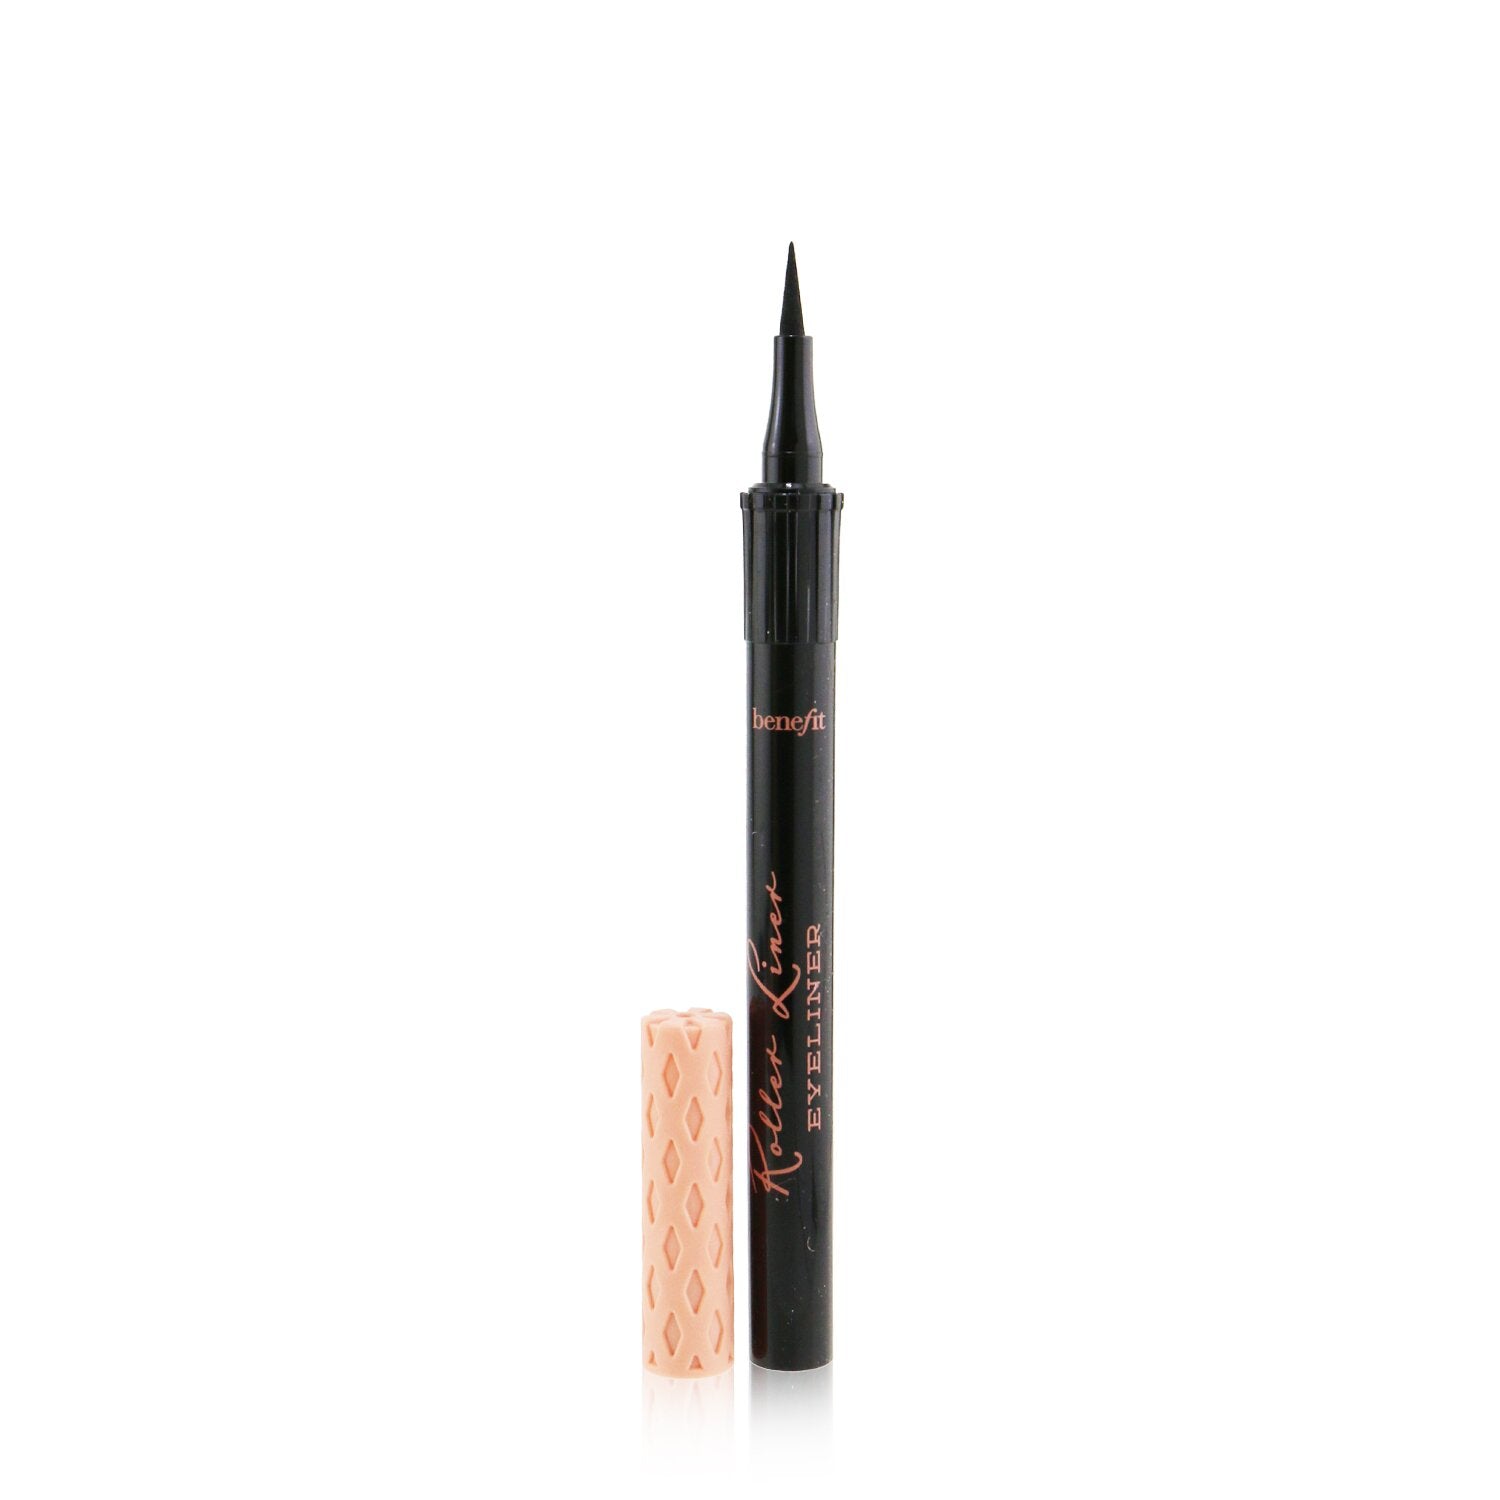 CHANEL Products Black Eyeliners for sale